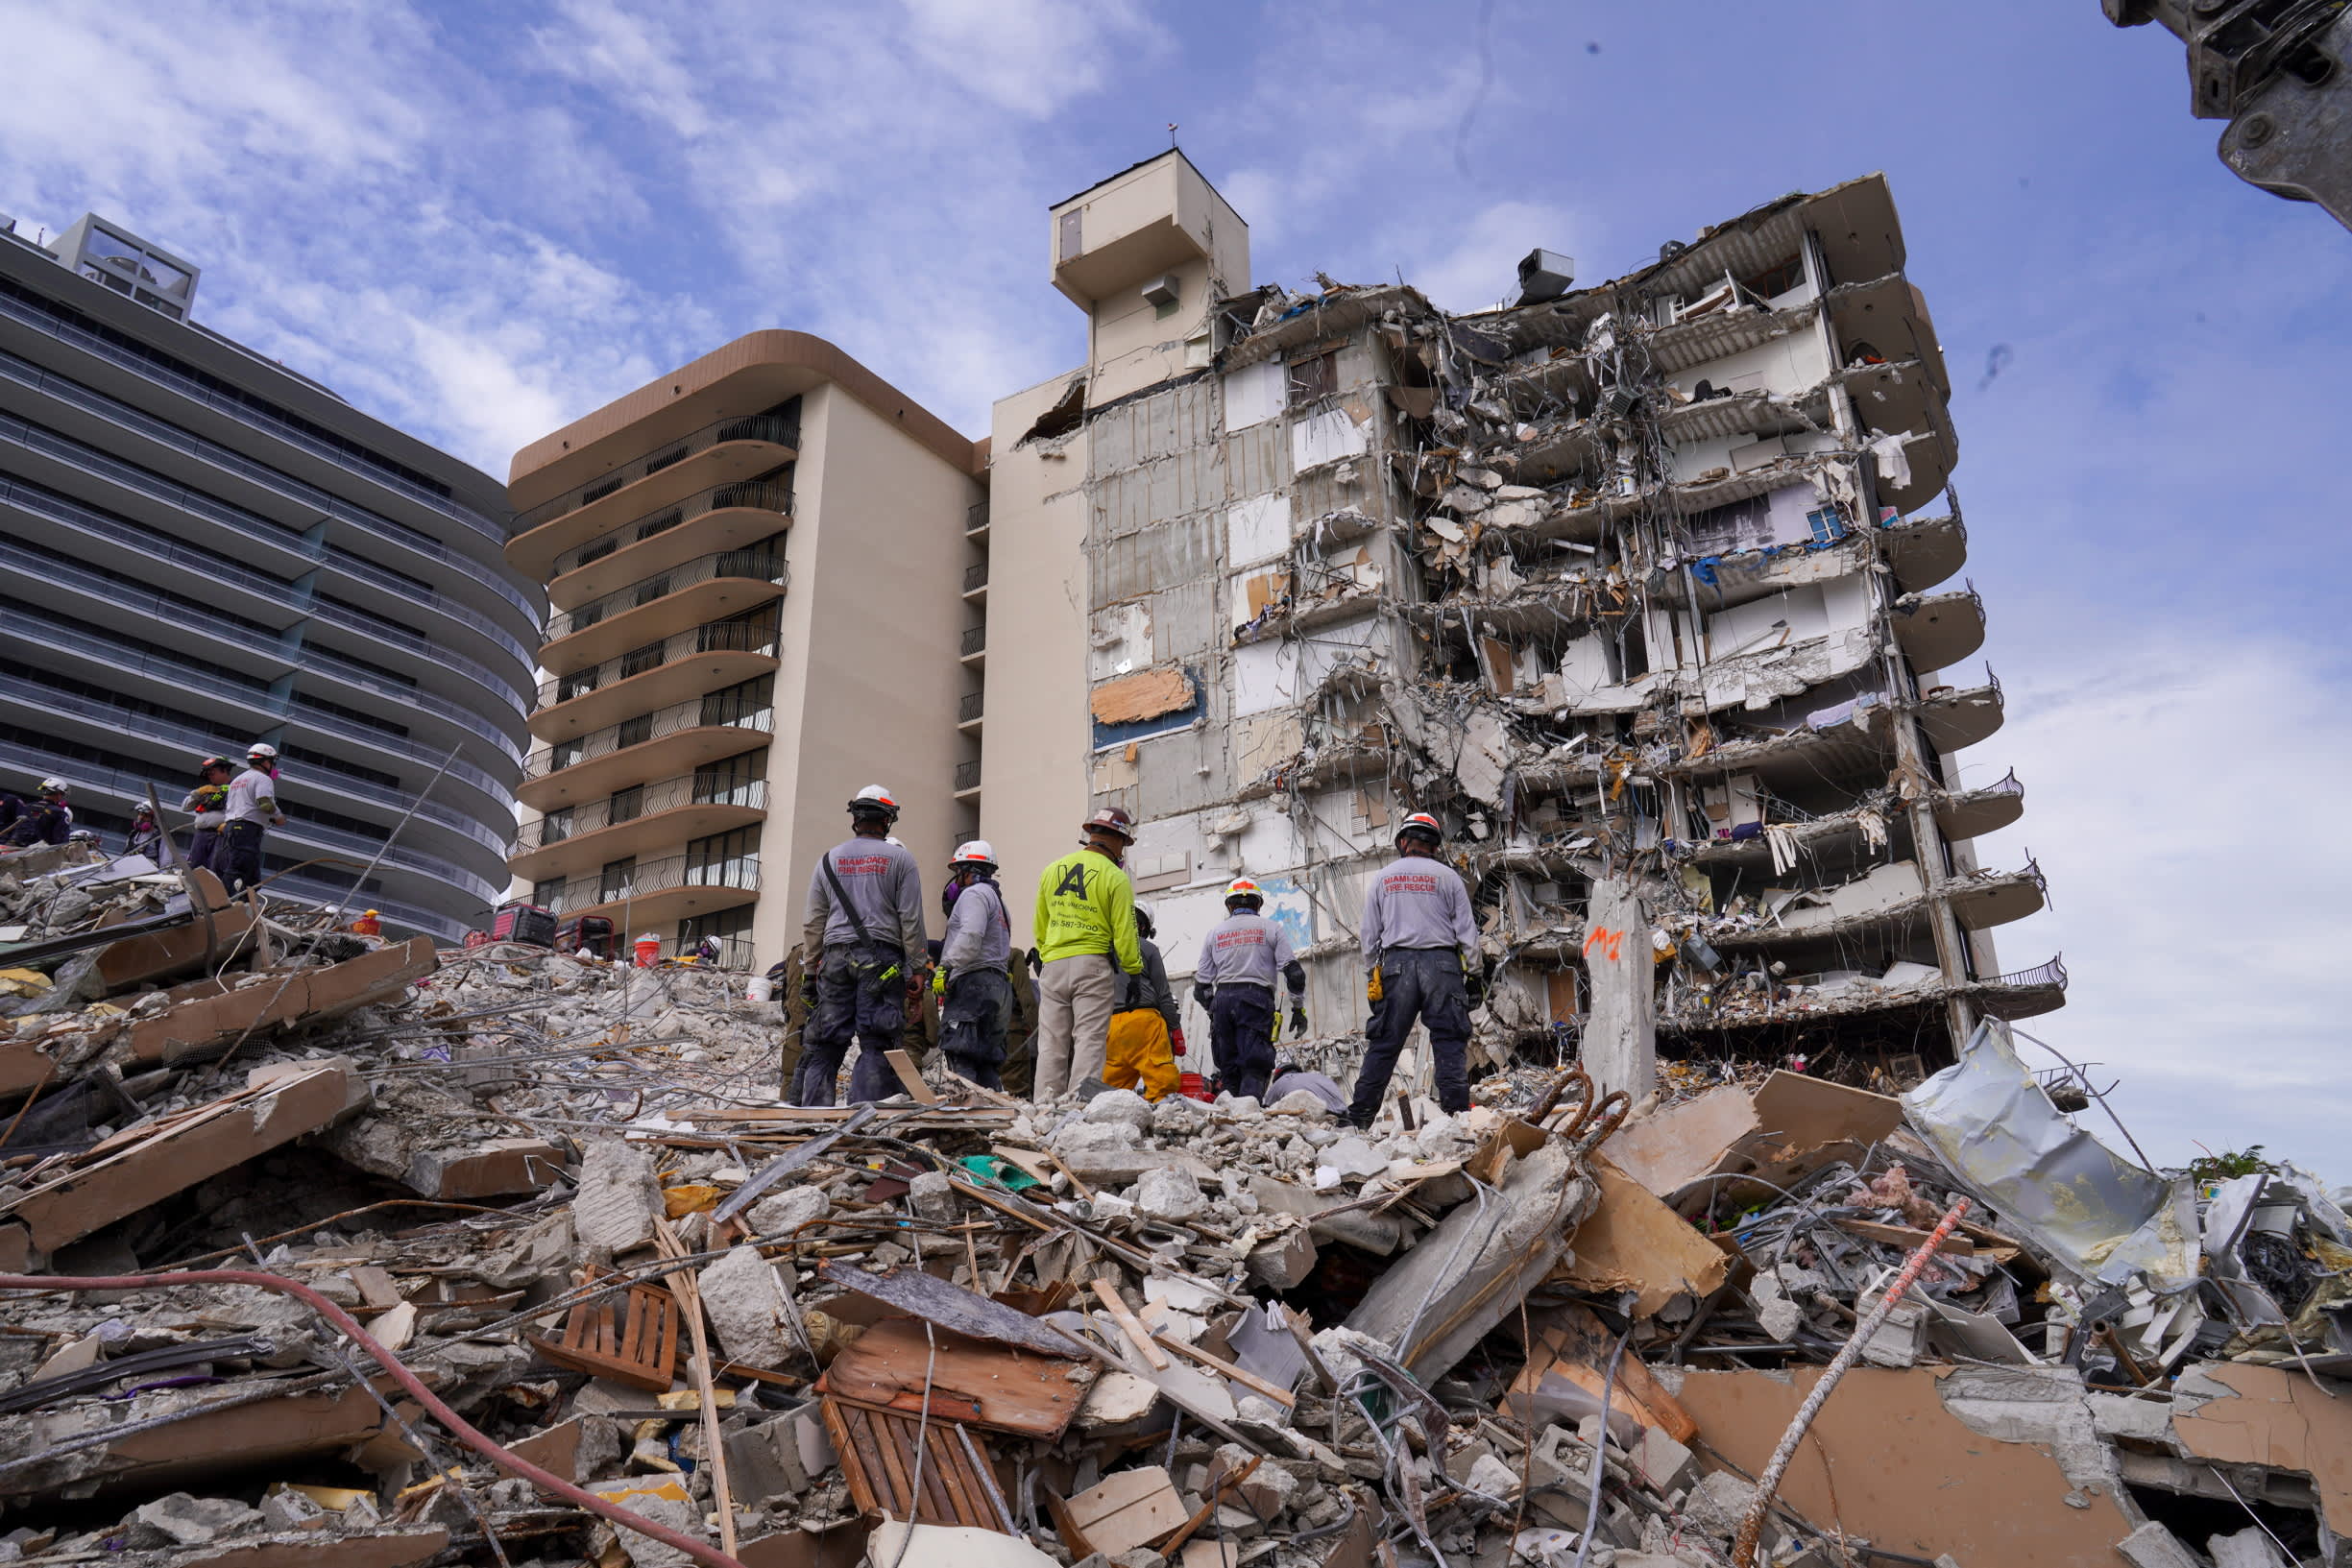 Demolition of collapsed condominium tower in Florida to start Sunday night time